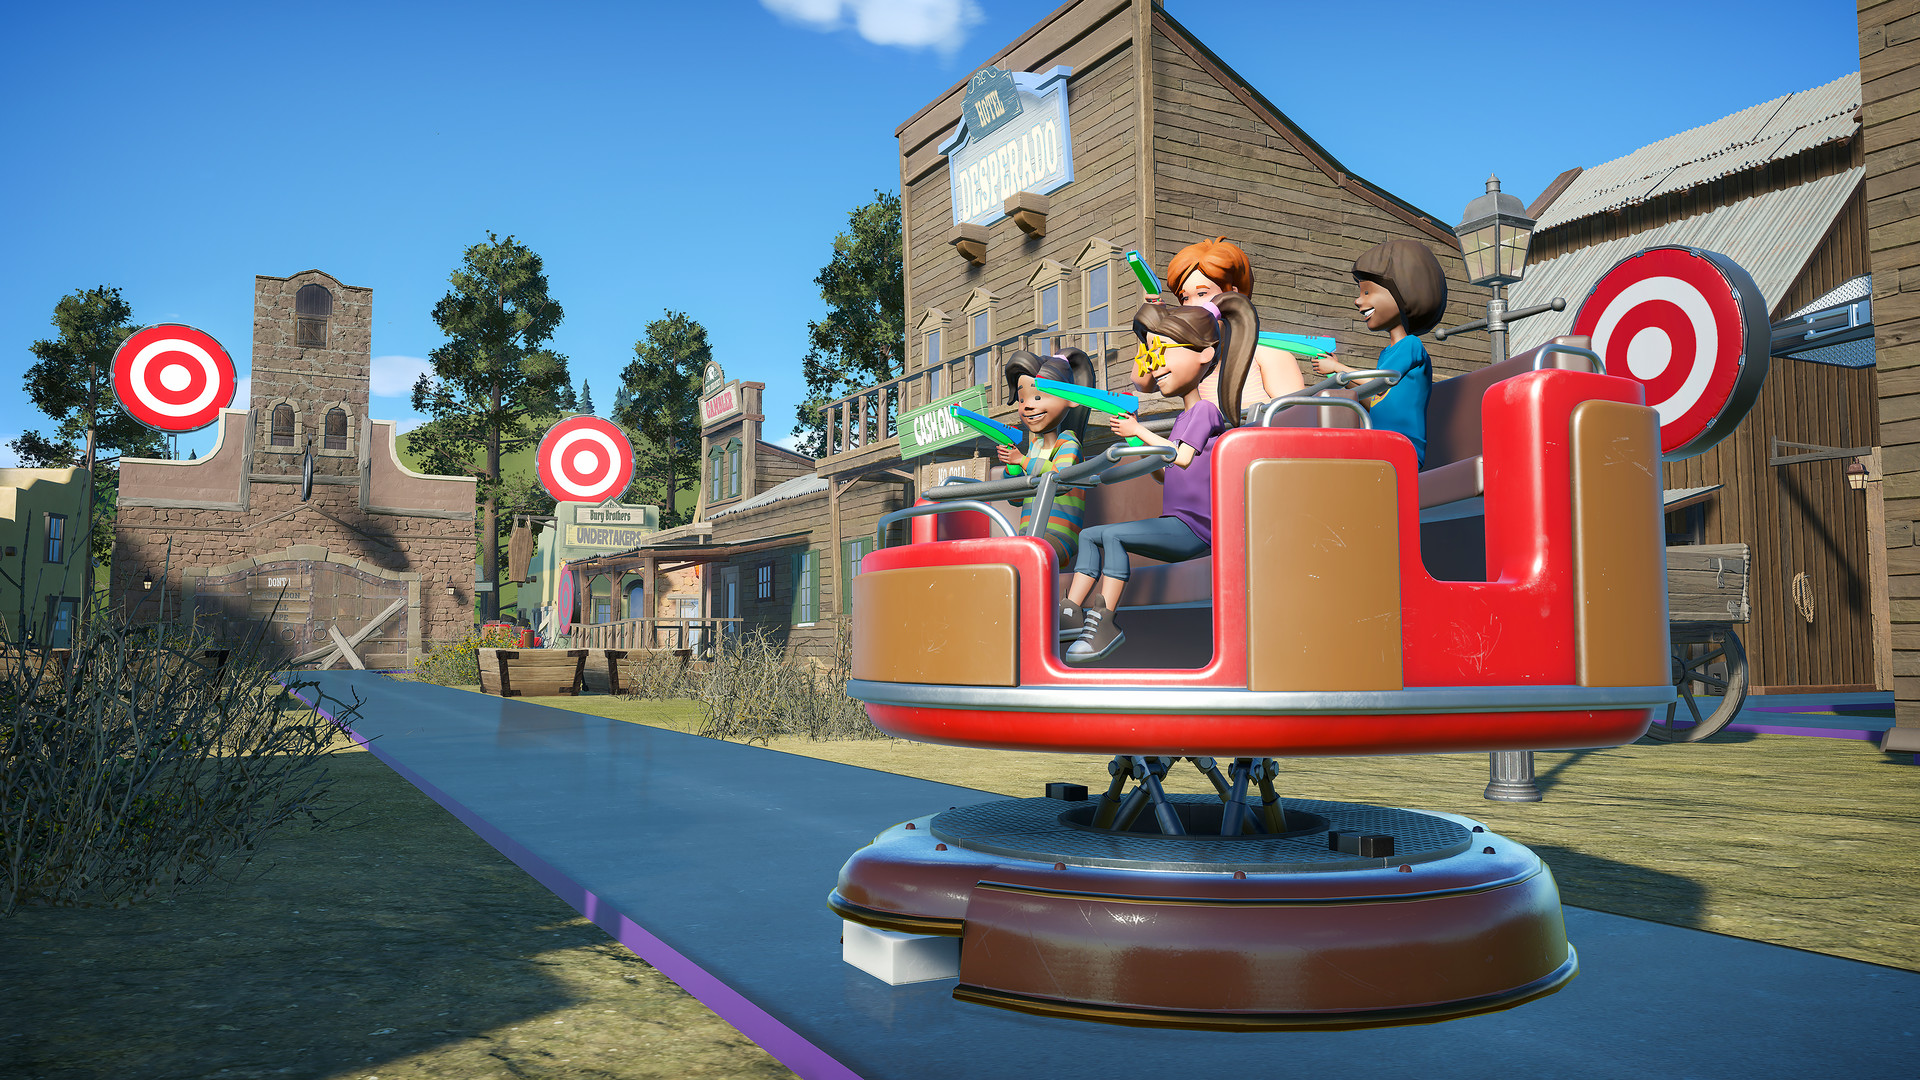 Planet Coaster - Quick Draw Interactive Shooting Ride Featured Screenshot #1